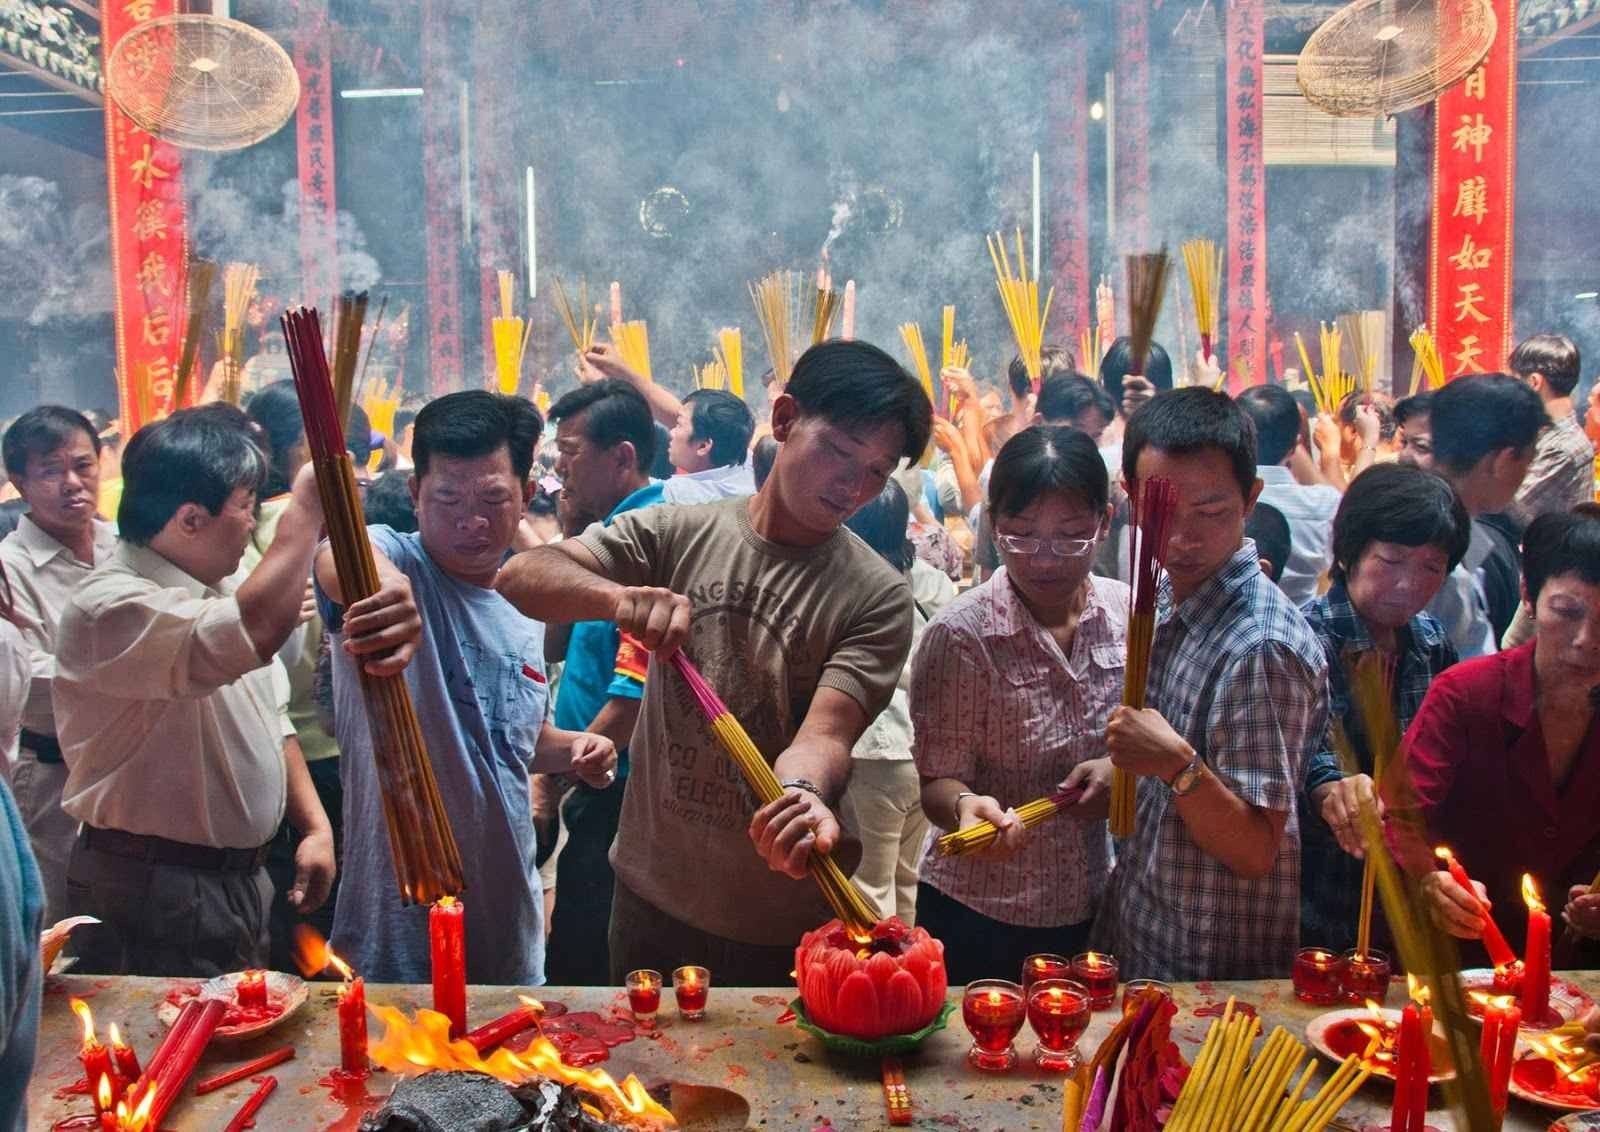 1581205259 4 The customs and traditions of the Vietnamese people celebrate the - The customs and traditions of the Vietnamese people celebrate the Vietnamese New Year and the atmosphere full of joy and color